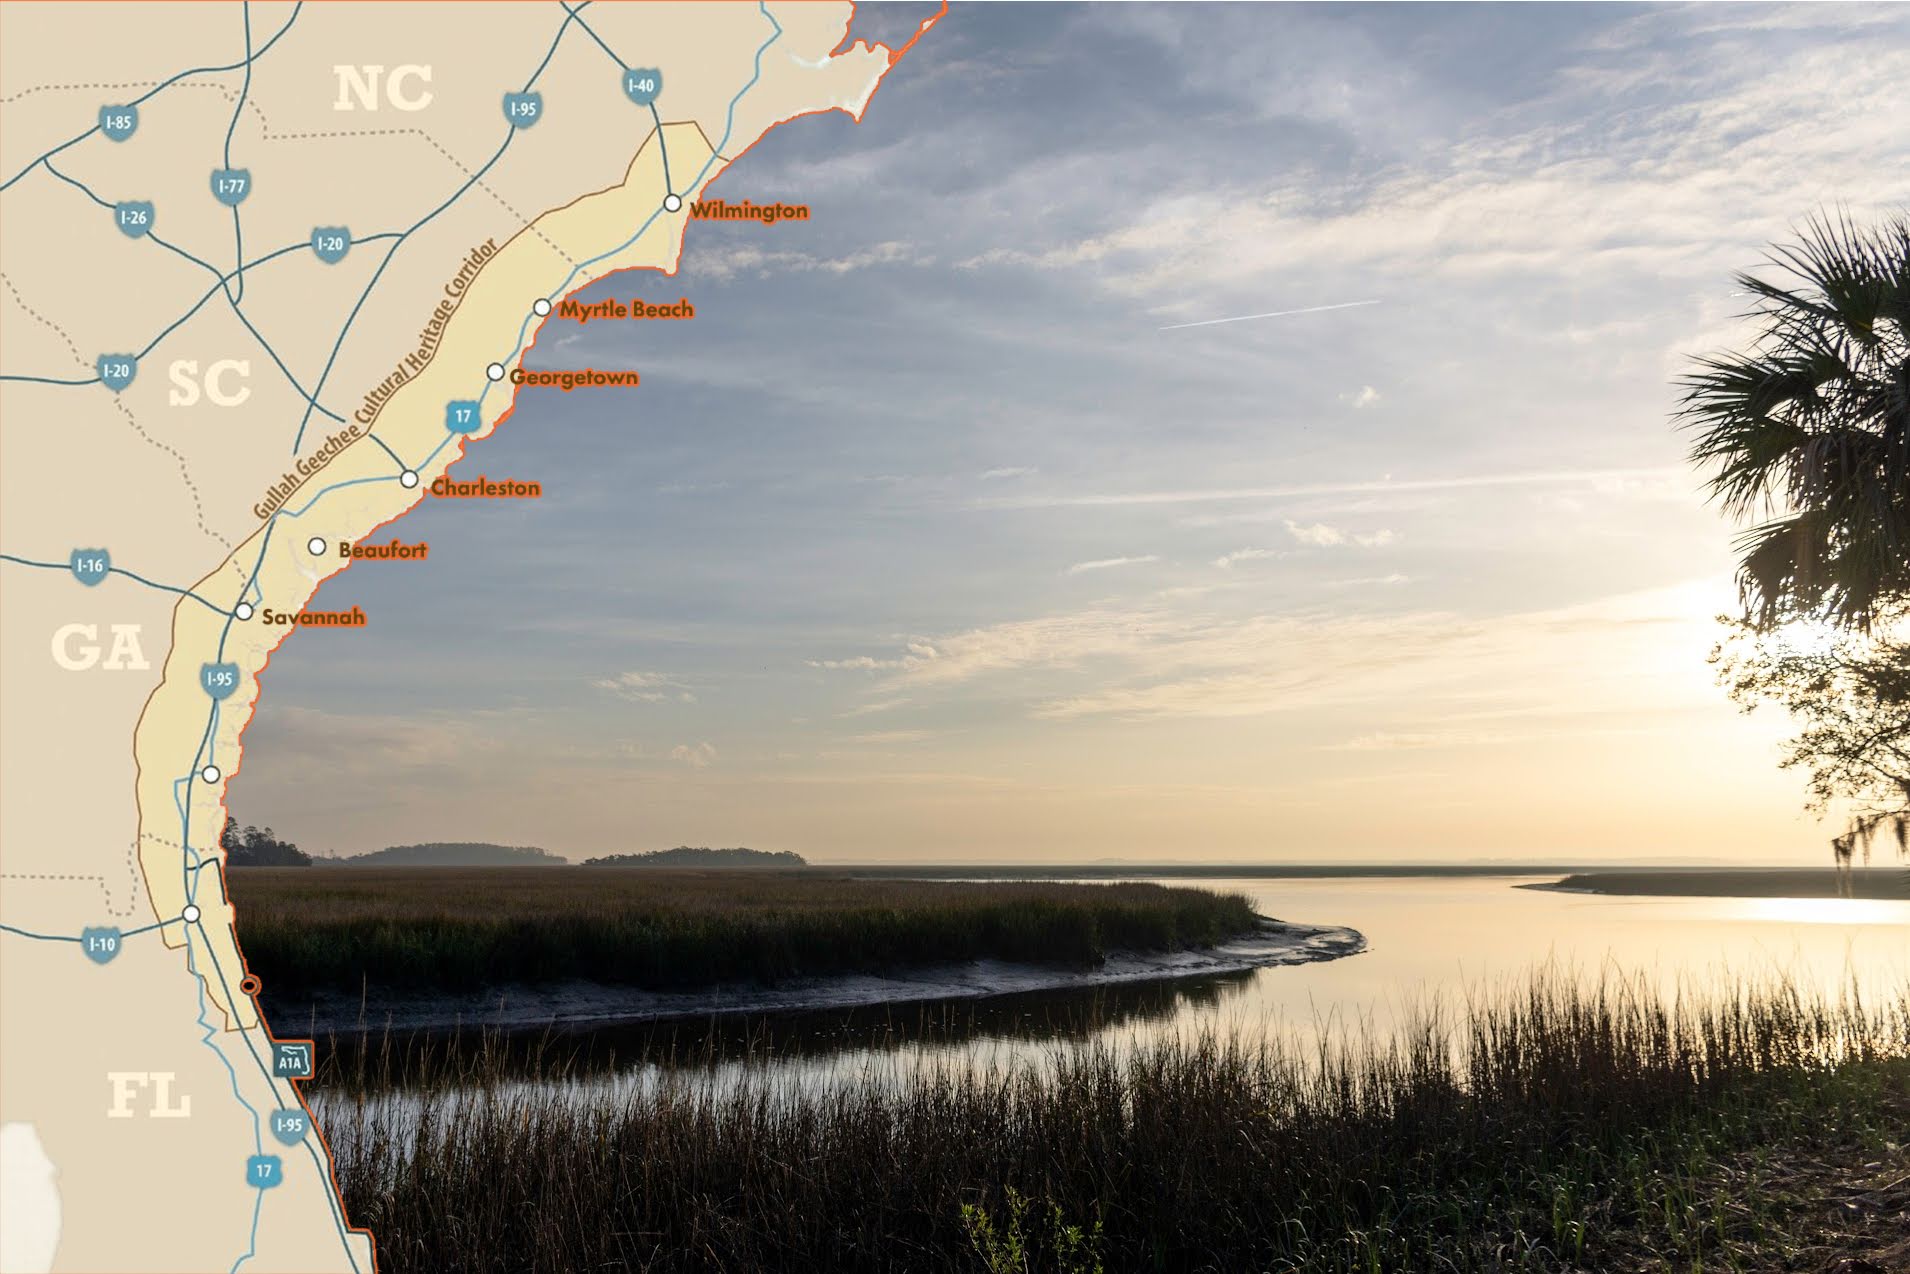 The Gullah/Geechee Historic Corridor extends from as far south as Jacksonville, Florida, and as far north as Wilmington, North Carolina nuestro stories